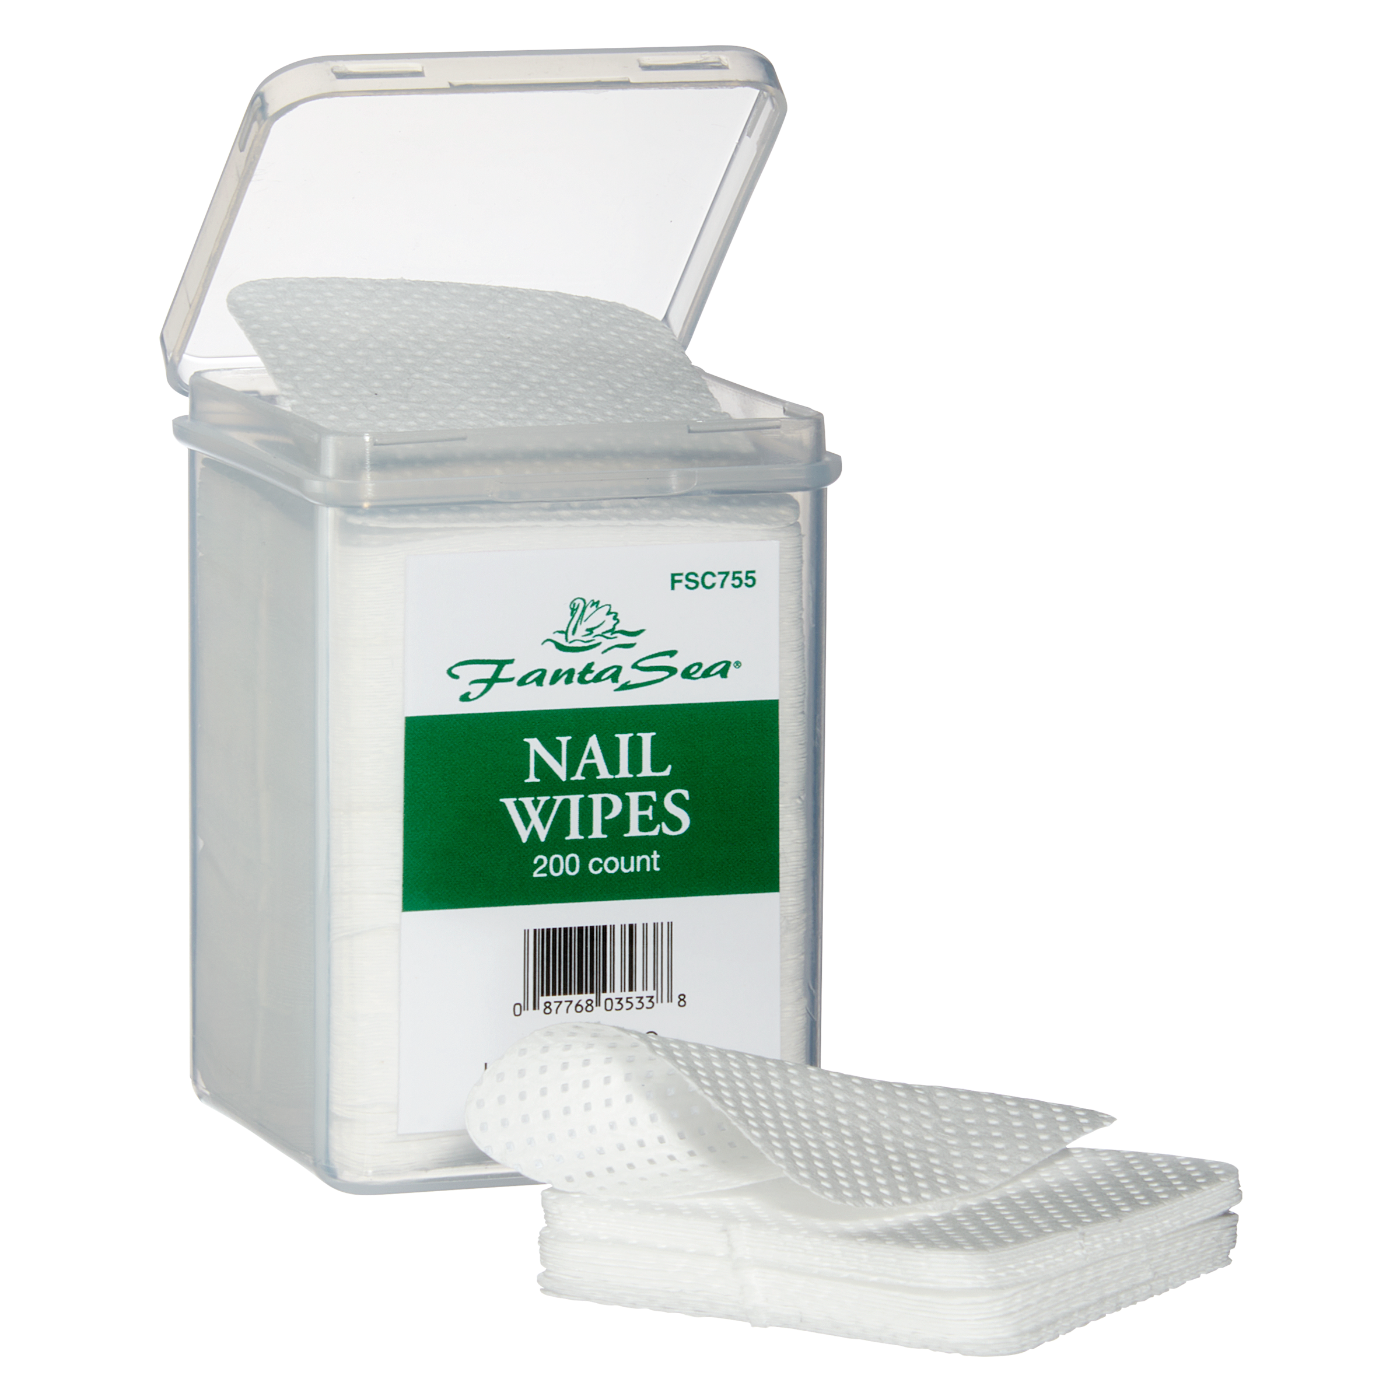 Nail Wipes in a Container - 2" x 2"